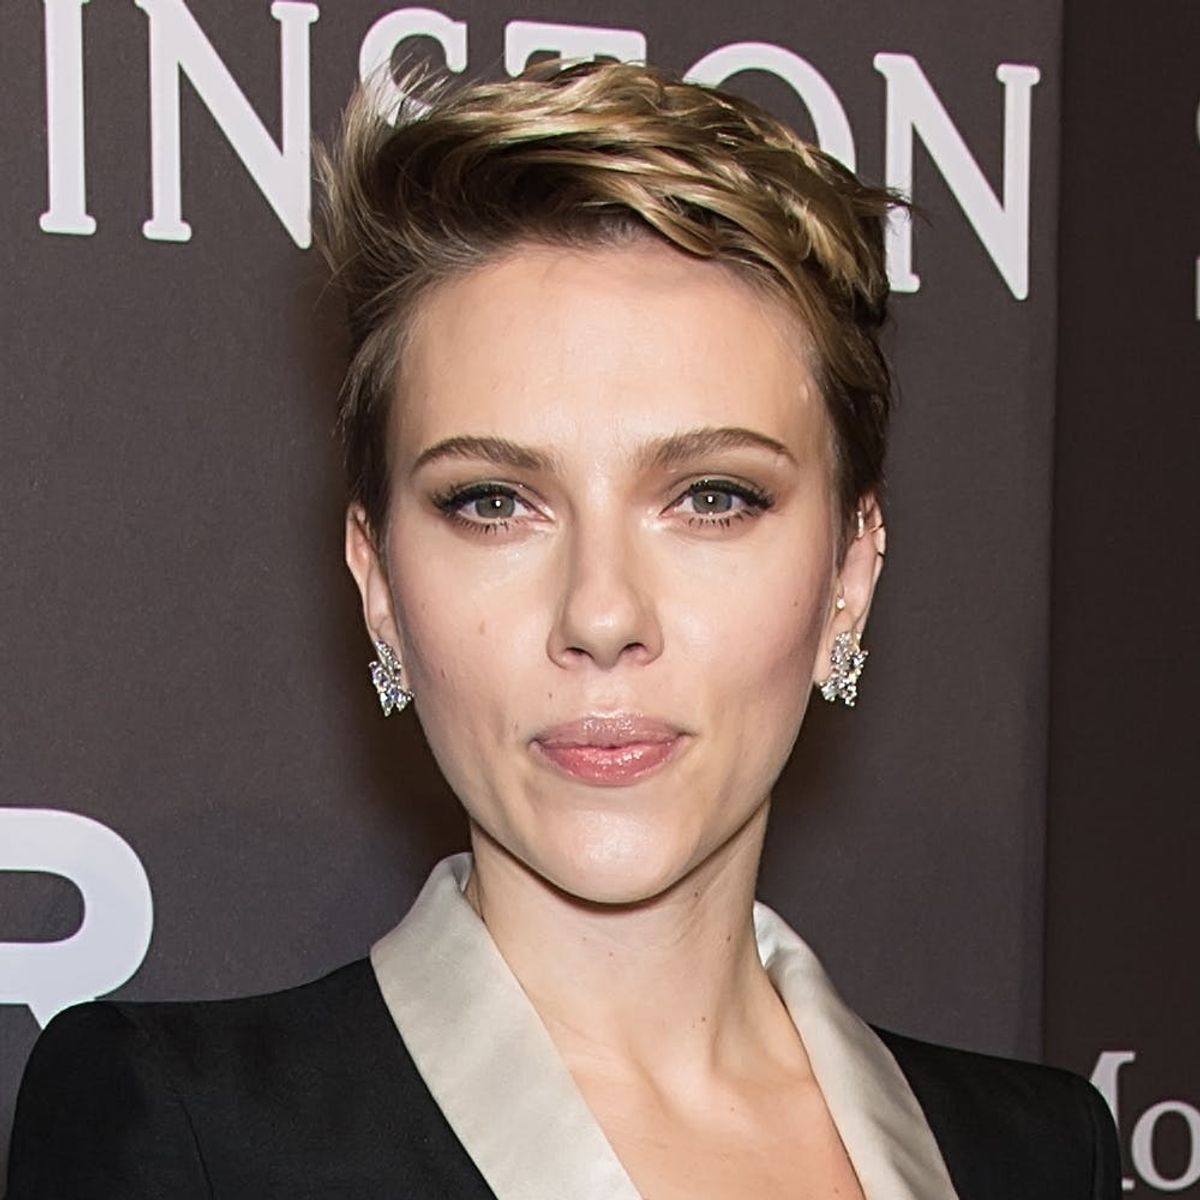 Scarlett Johansson Reveals That As a Working Mom, She’s “Barely Holding It Together”